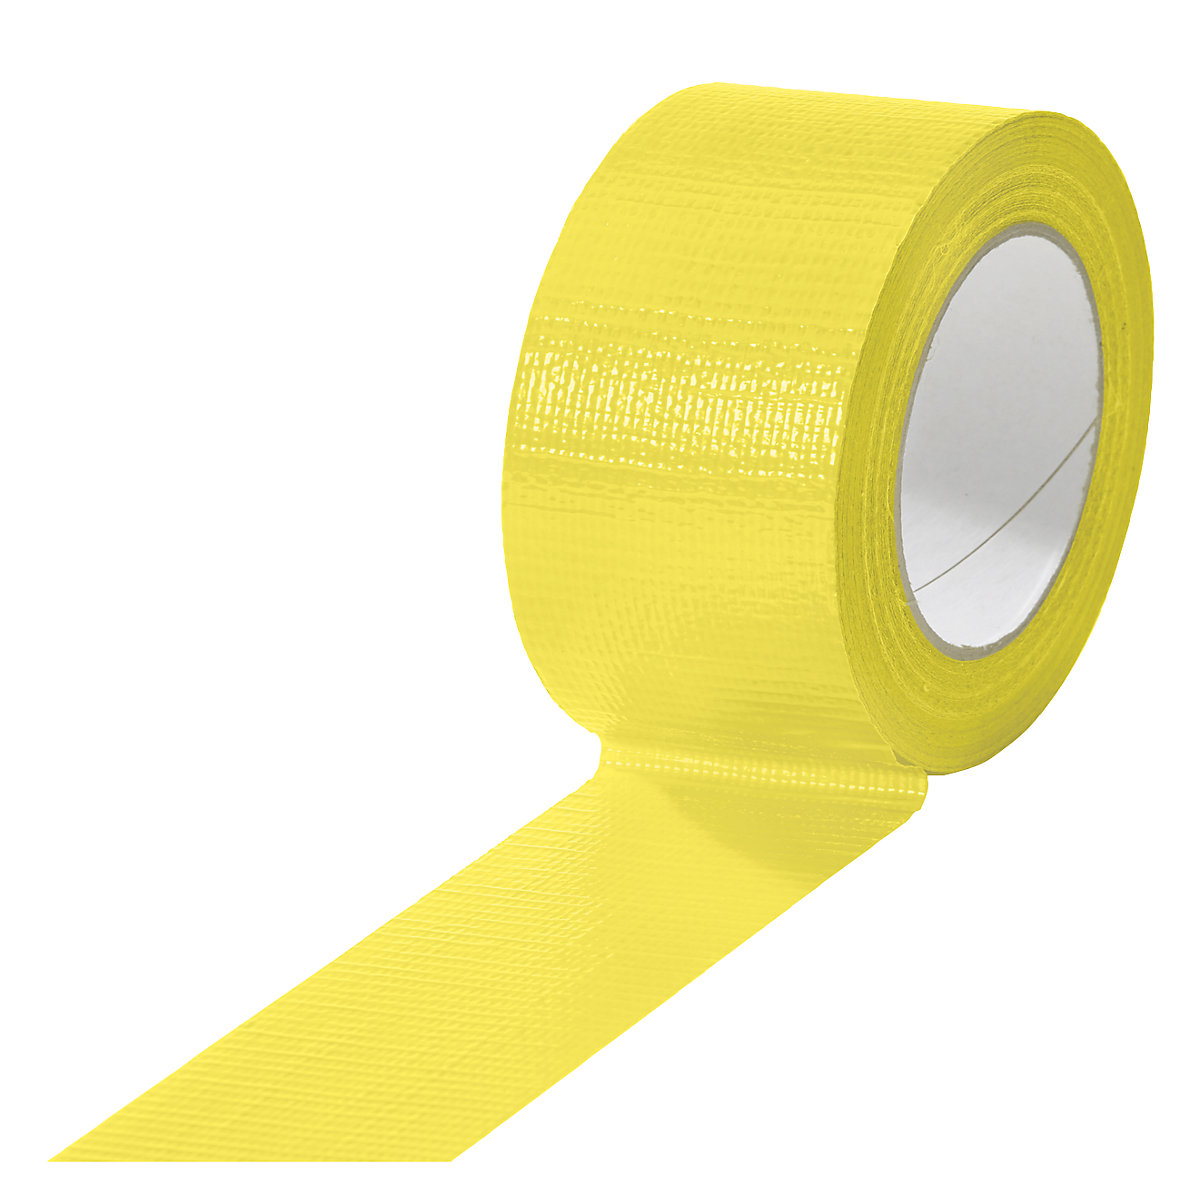 Fabric tape, in different colours, pack of 18 rolls, yellow, tape width 50 mm-5